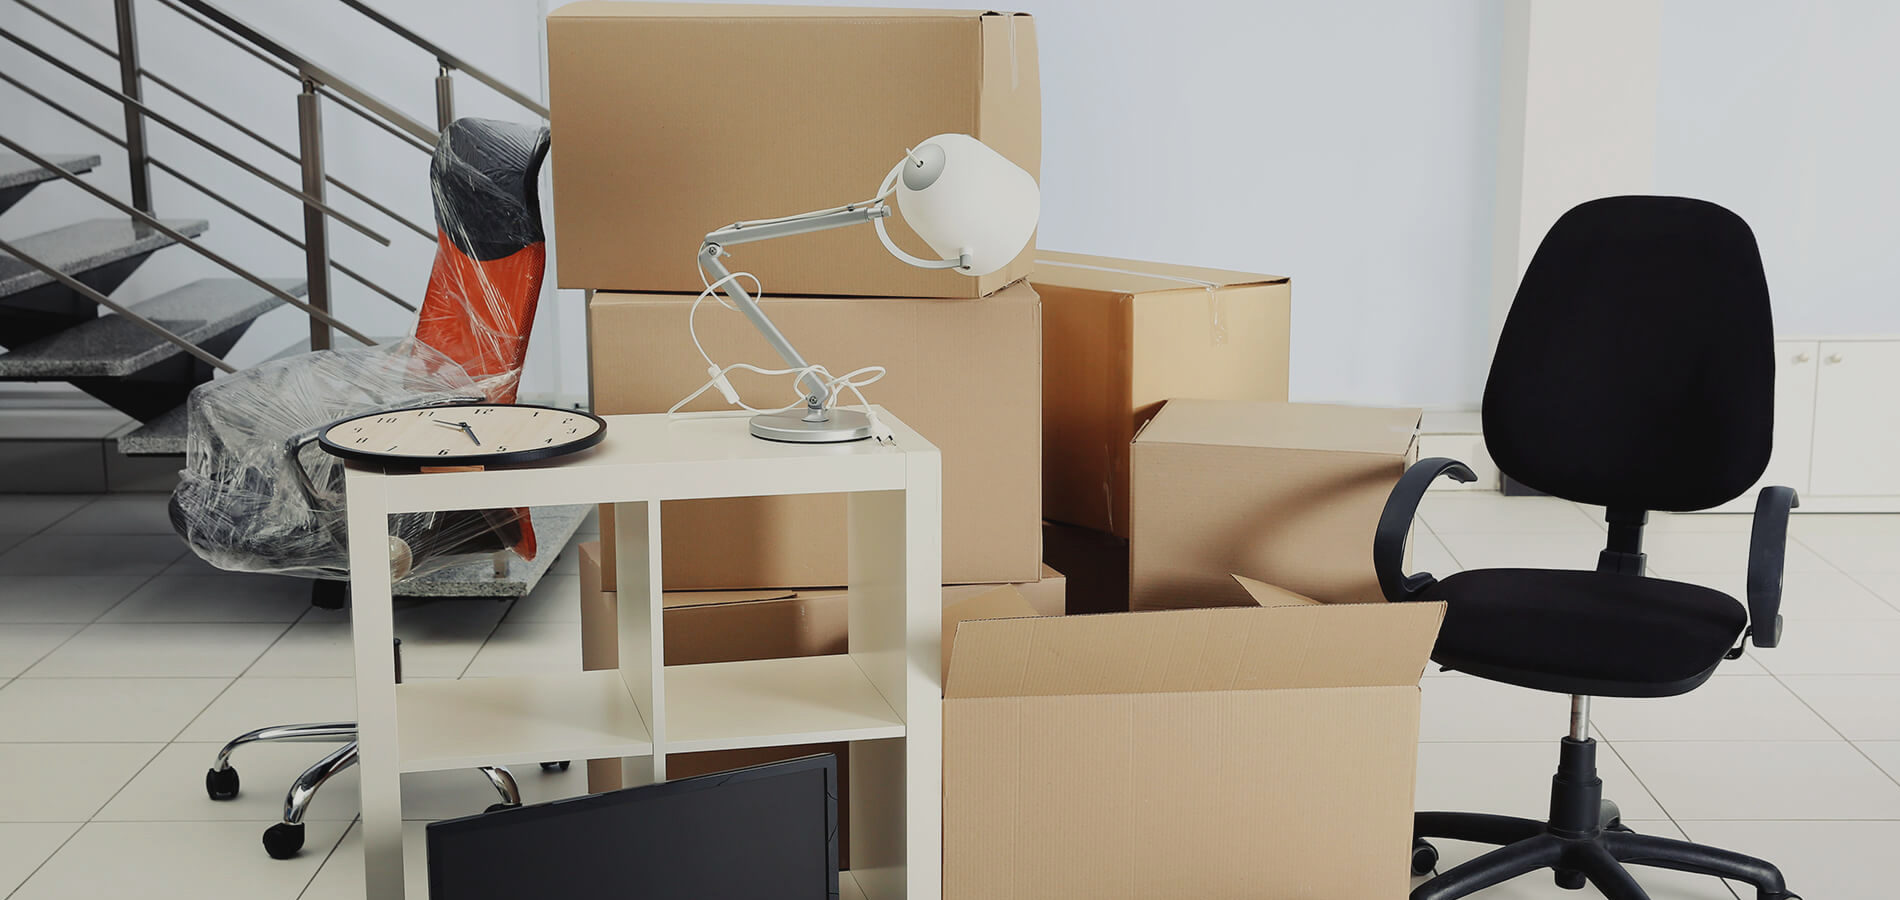 House Shifting Service in Dhaka | Home shifting service